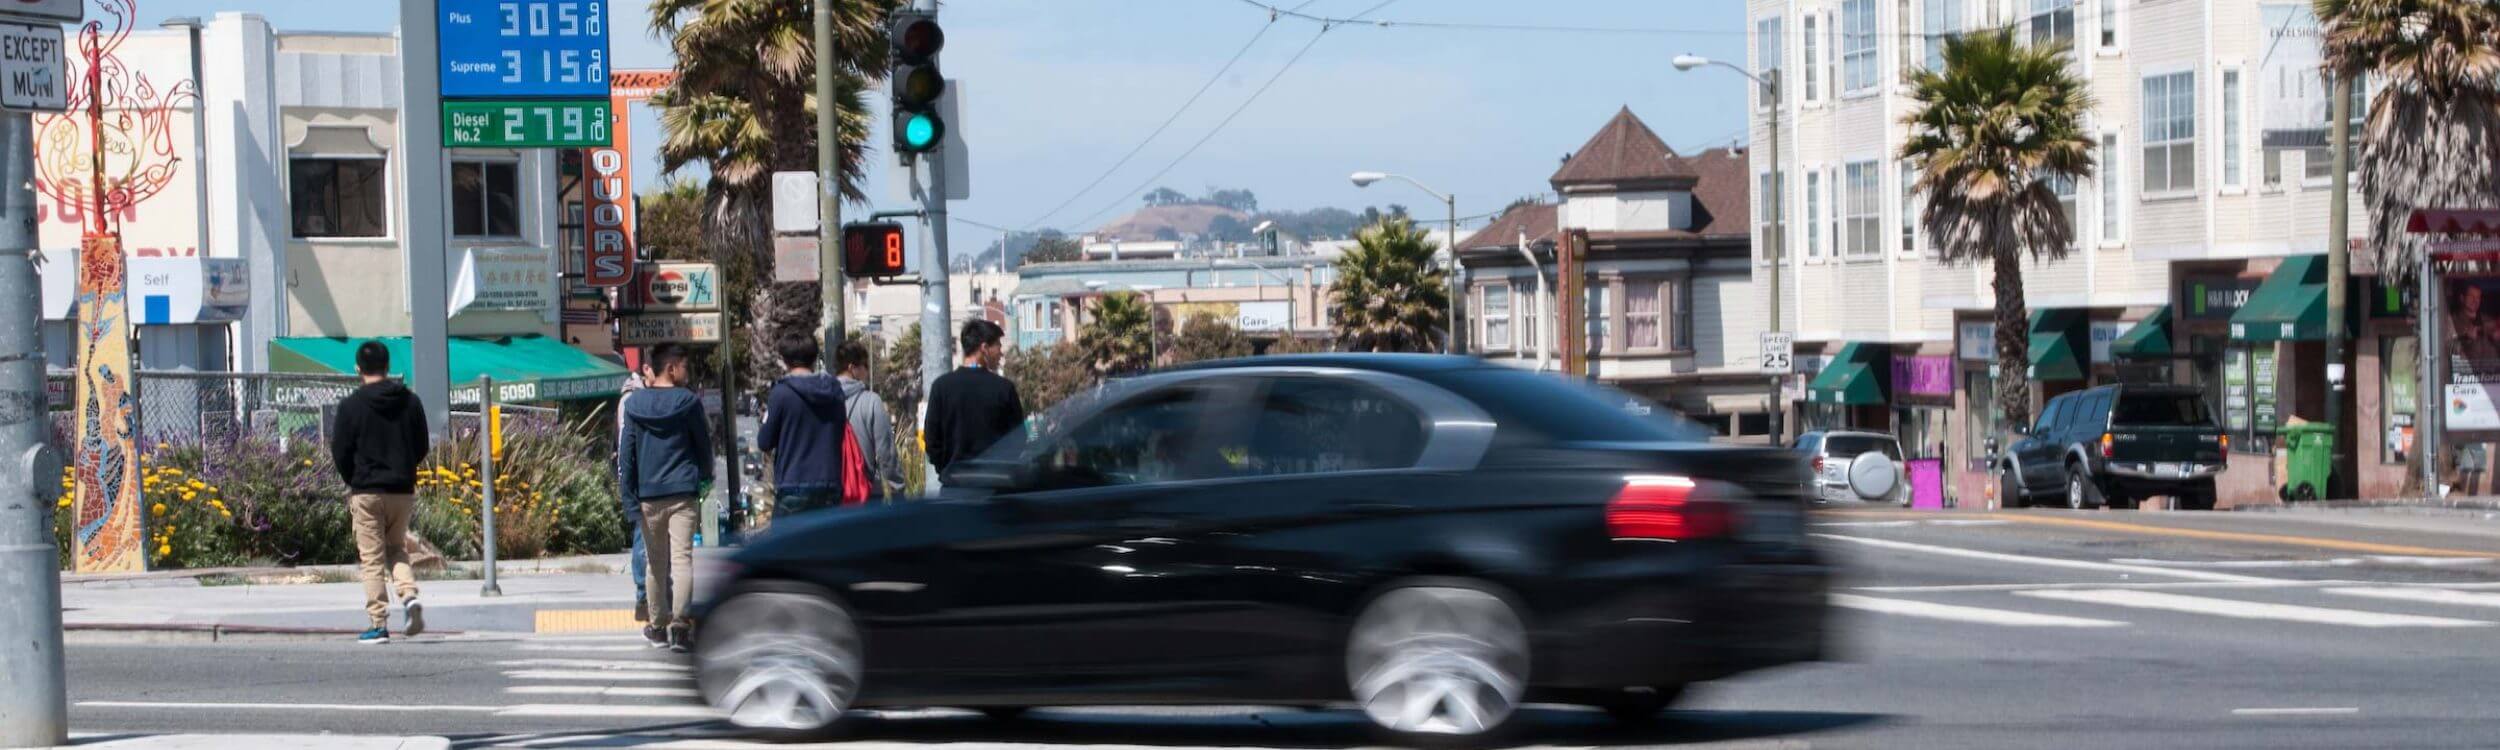 ‘Left turn calming’ should be a widespread safety solution in San Francisco